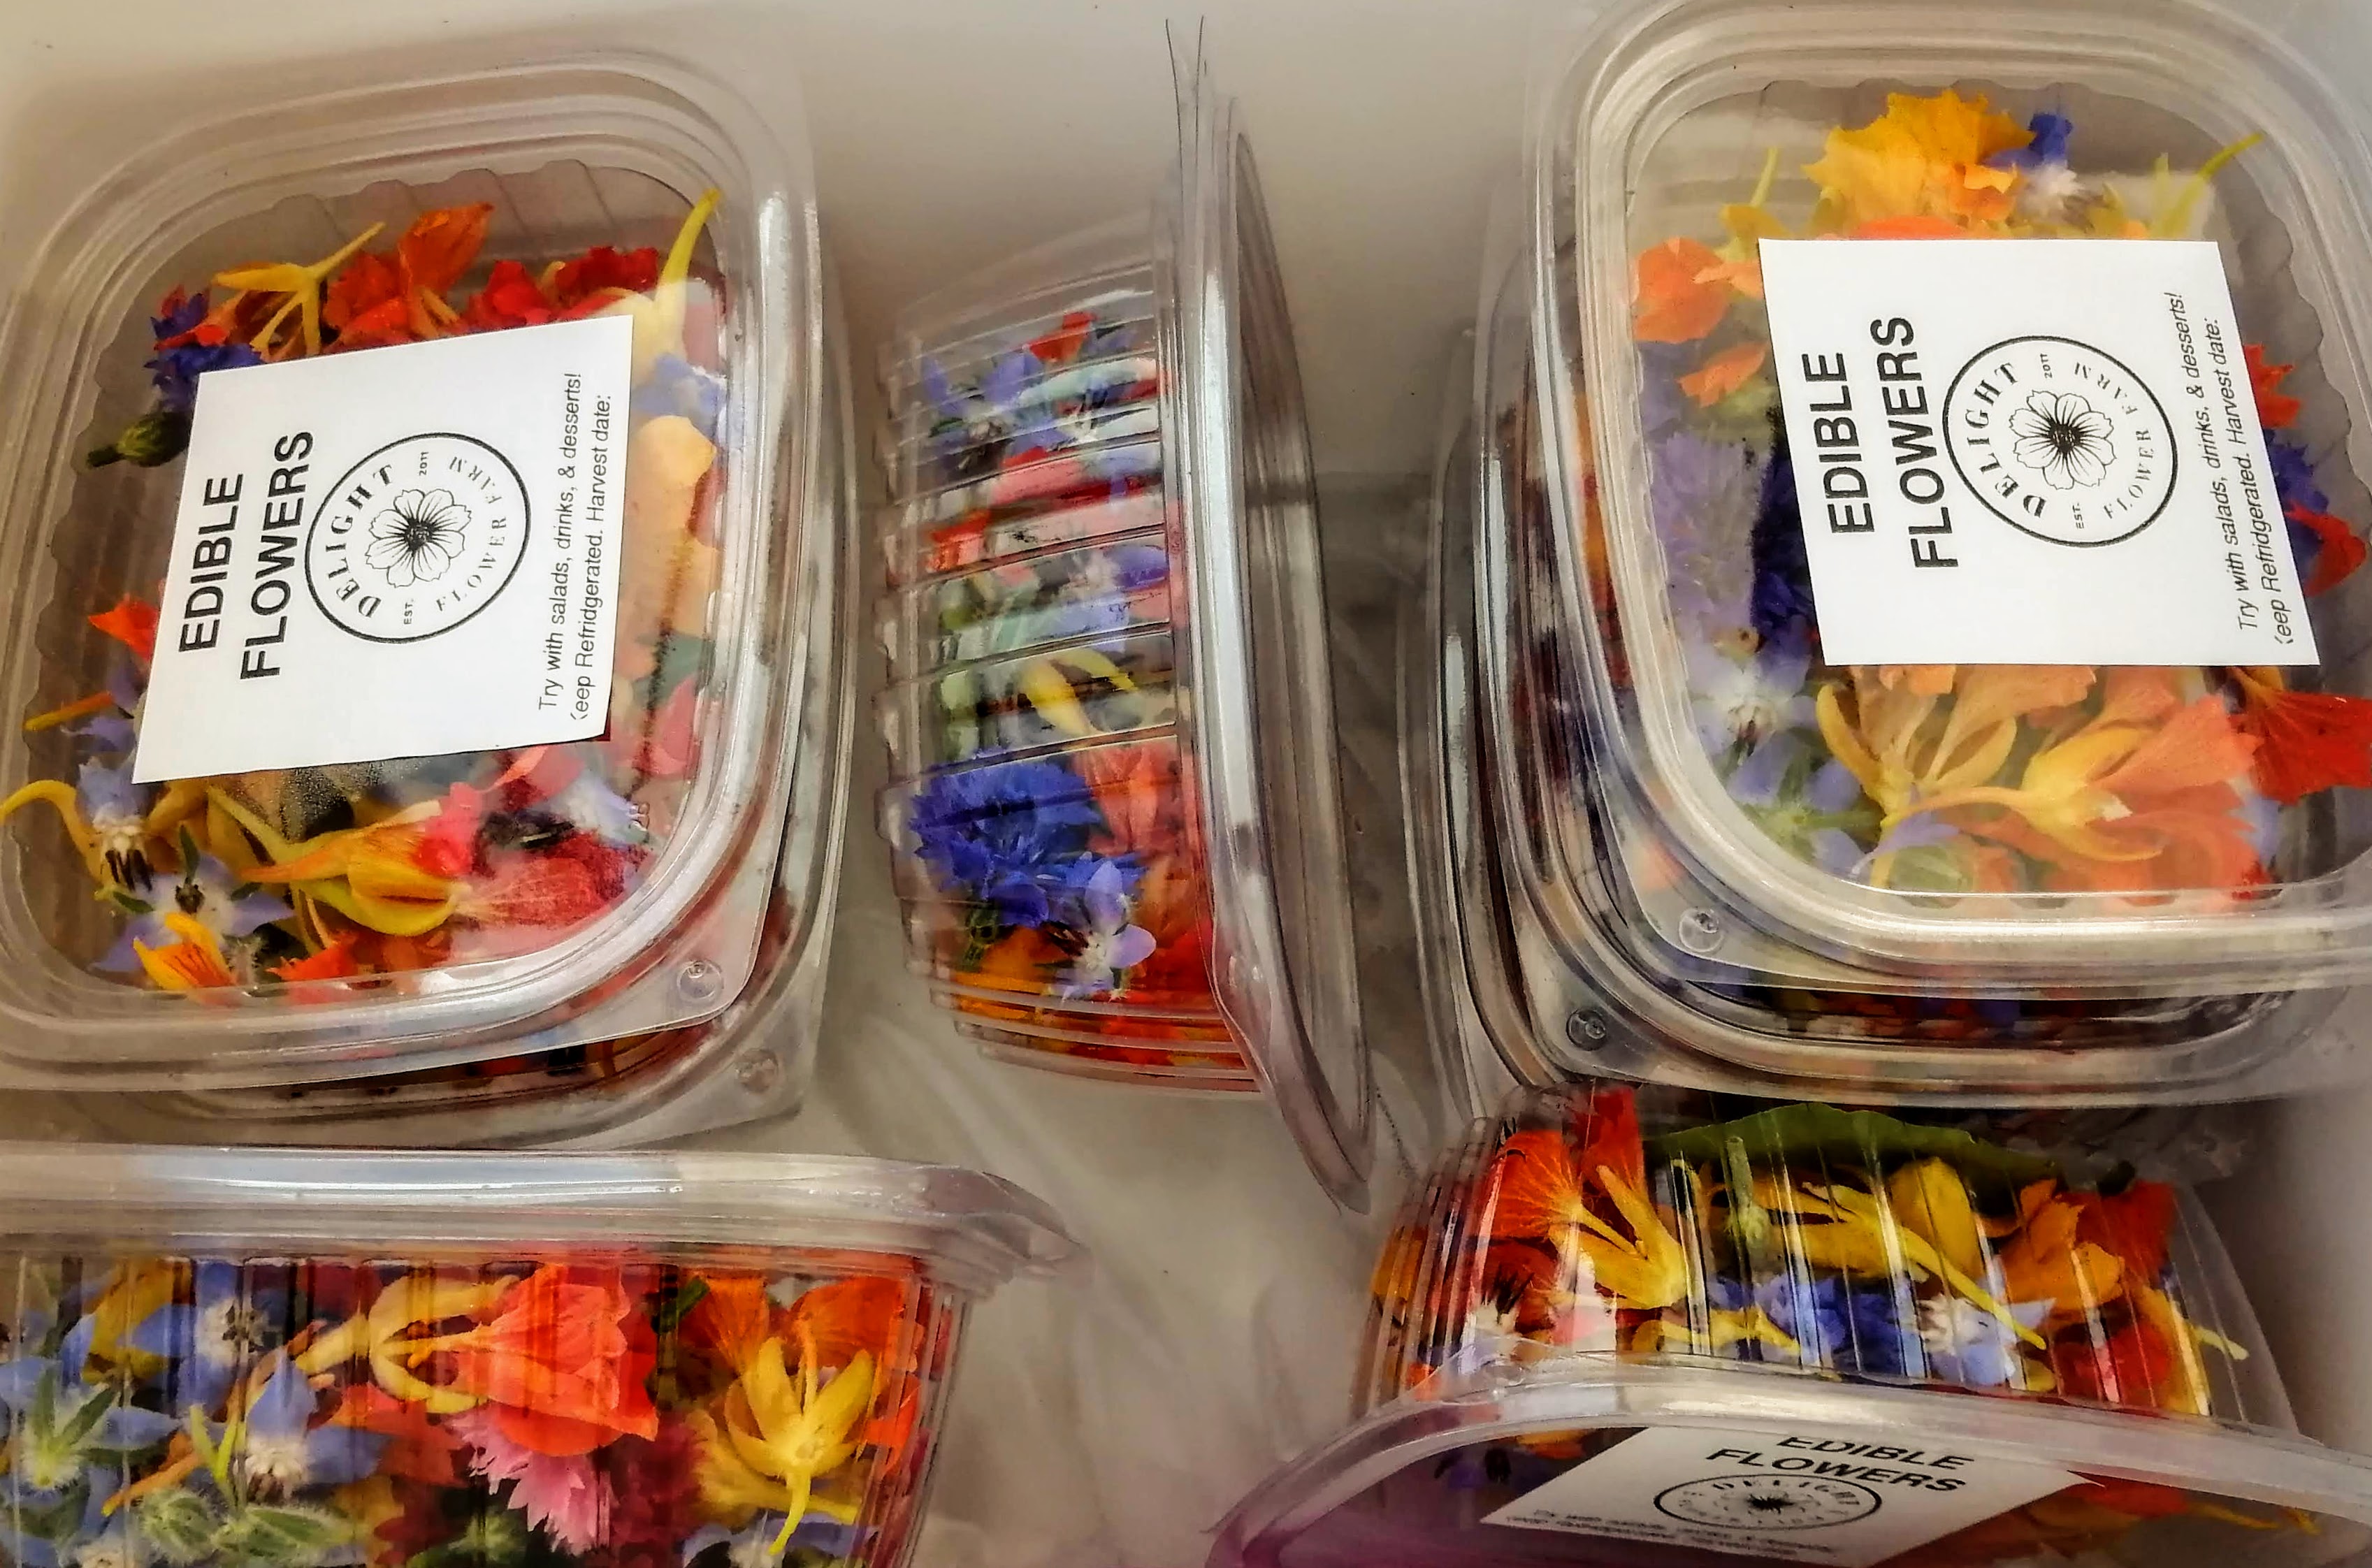 The inside of a cooler filled with packages of colorful editable flowers. Photo by Paul Young.